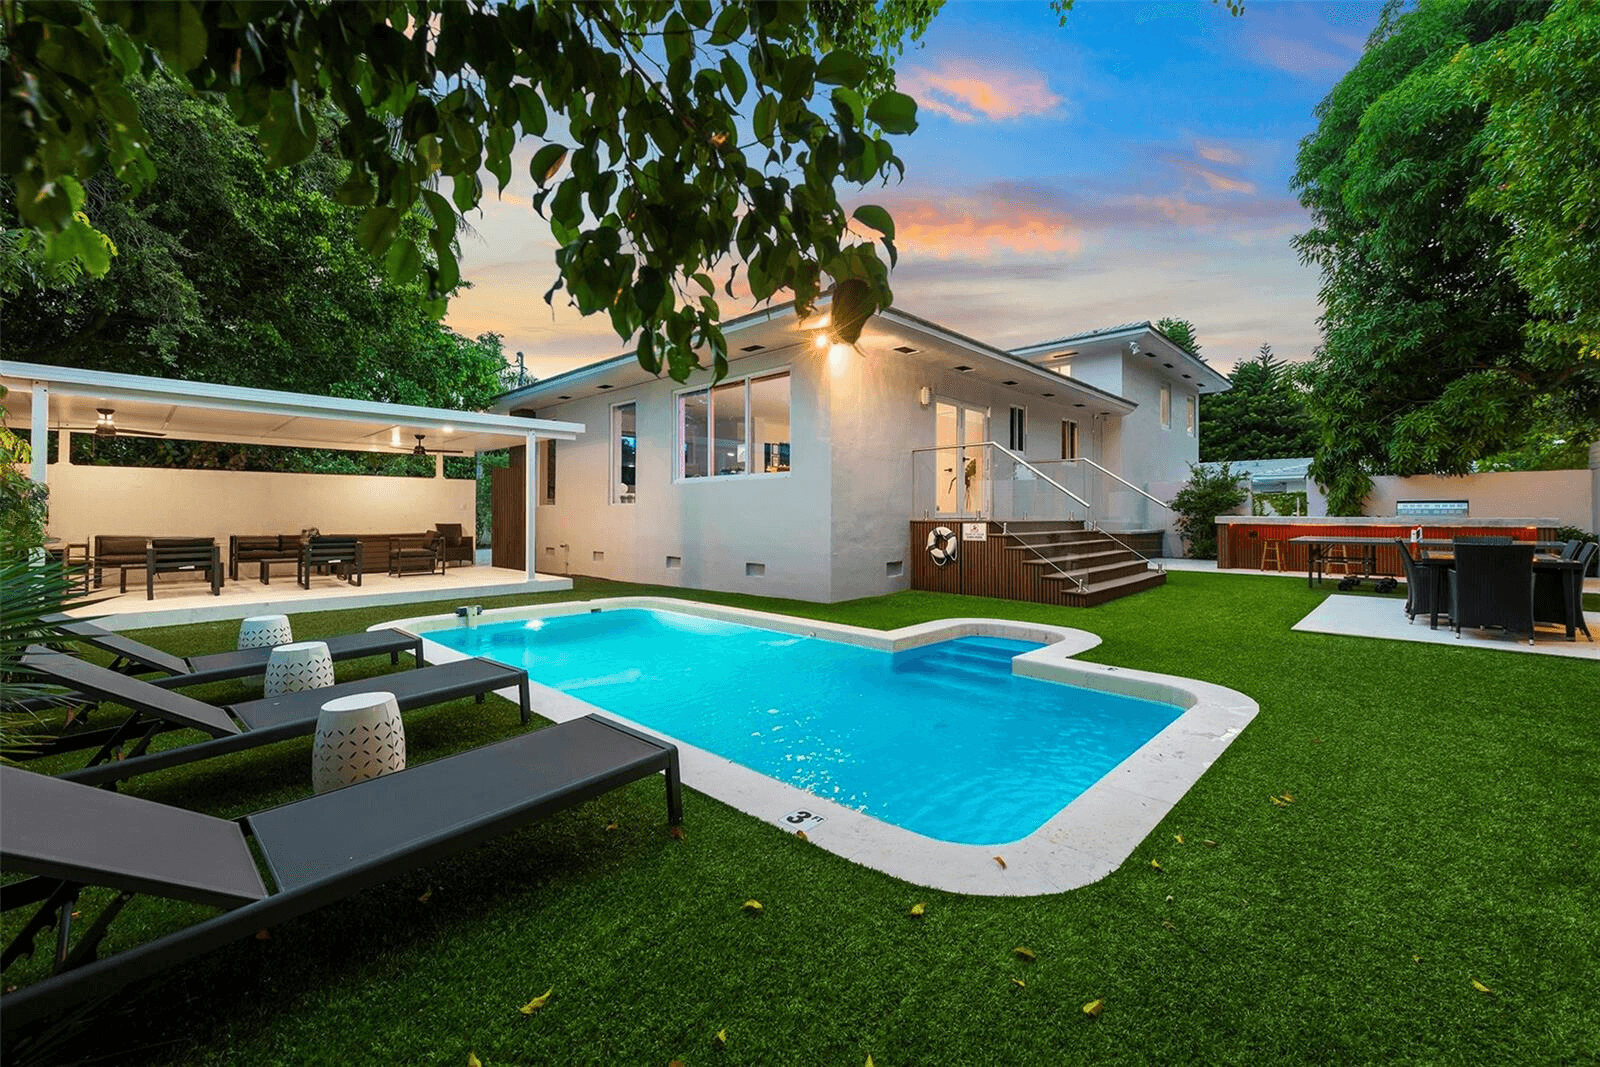 Recently Renovated Miami Shores Villa with Heated Pool, Outdoor Kitchen | 5 Beds | 3.5 Baths | 2368 sqft